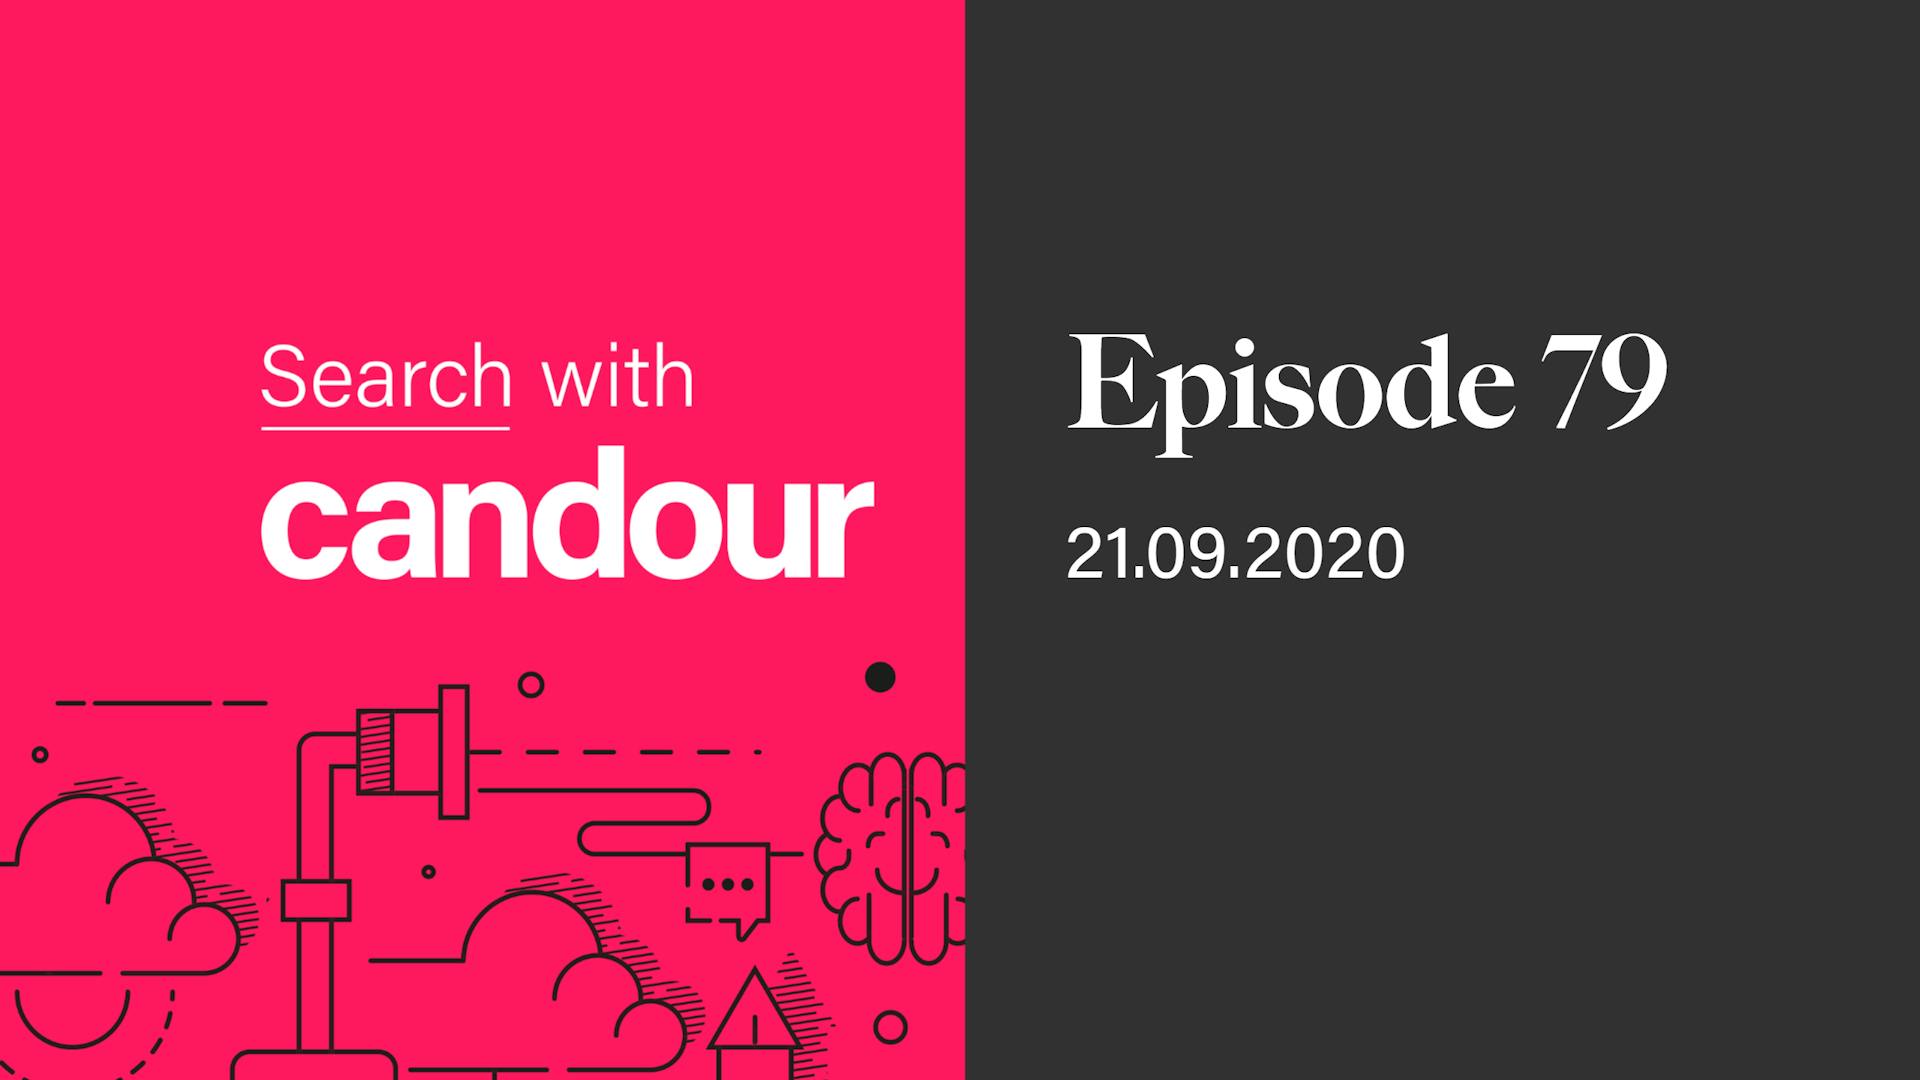 Episode 79 - Search with Candour